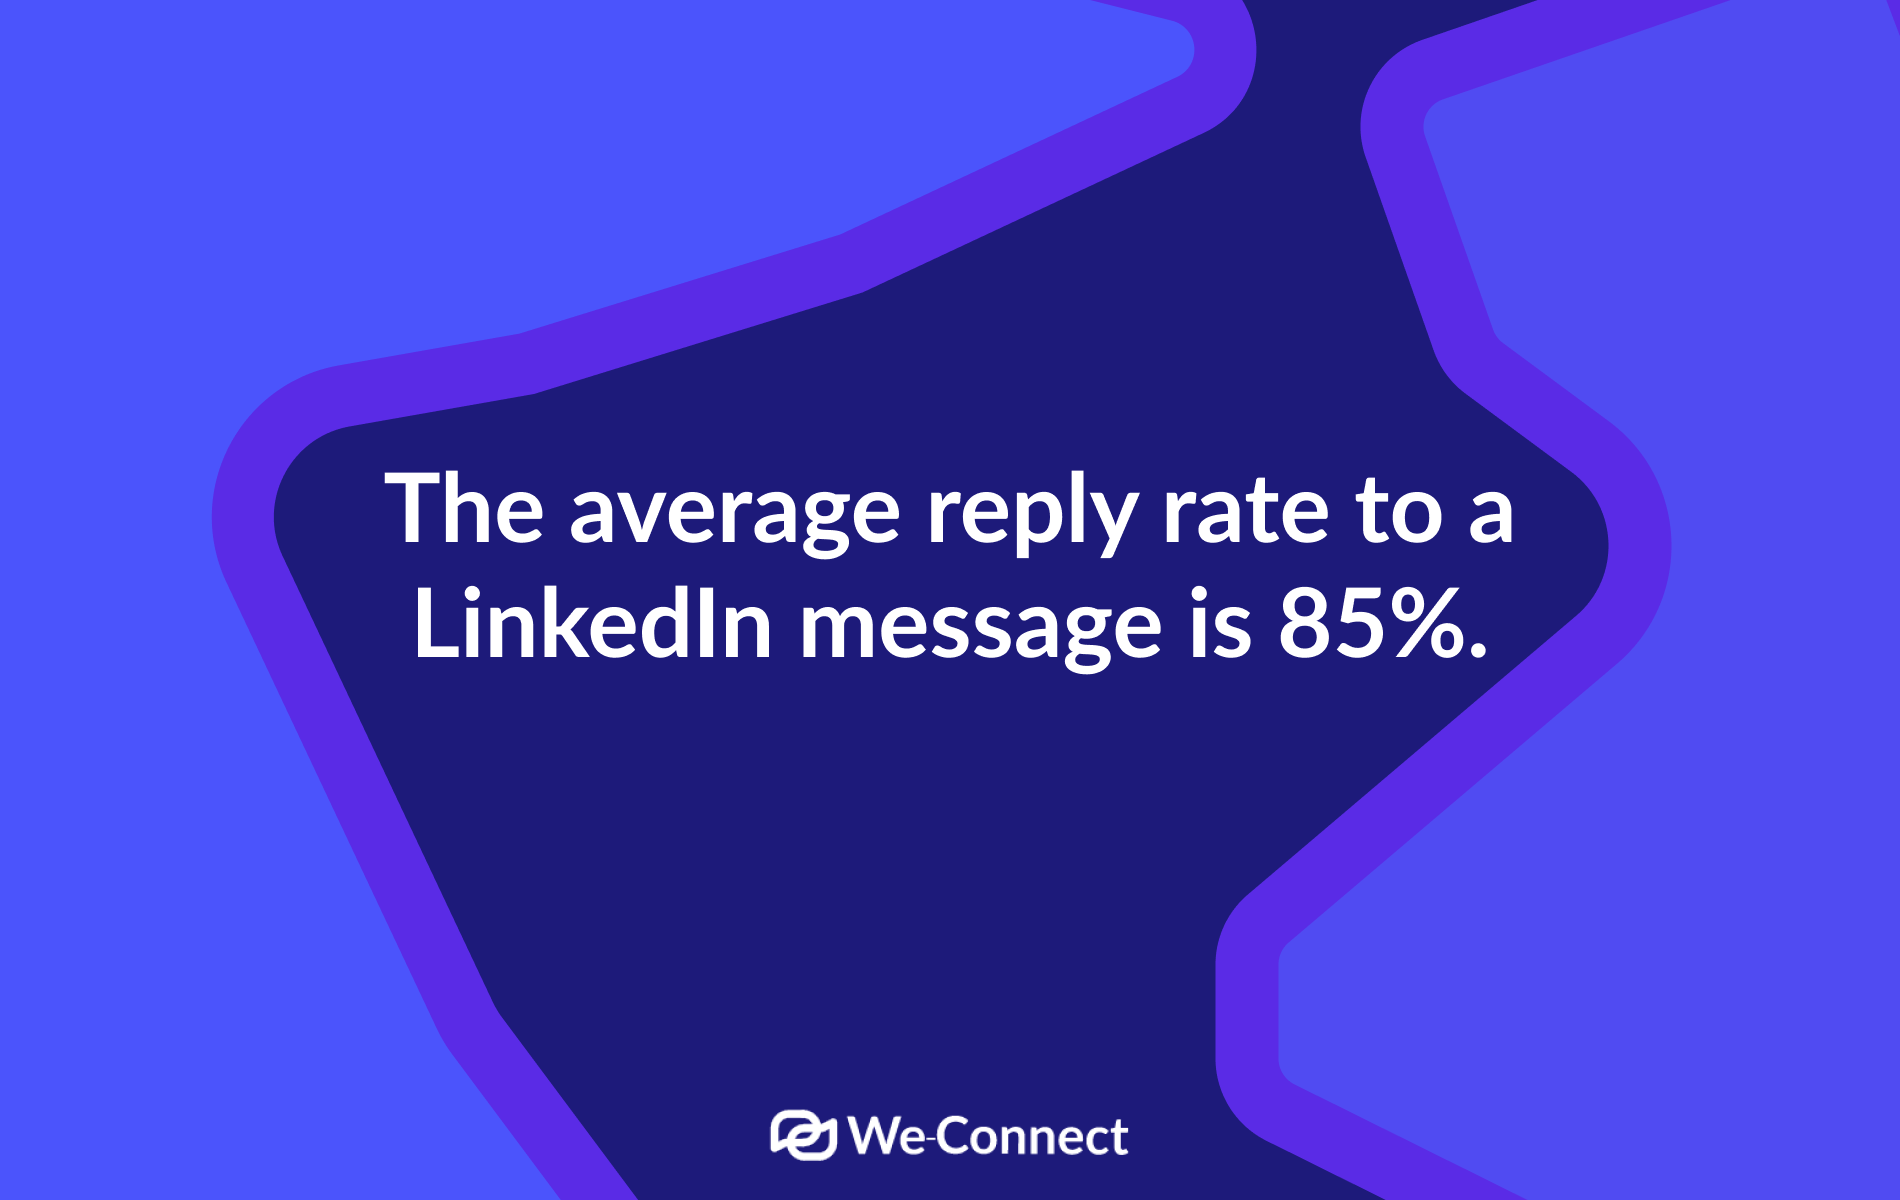 The average reply rate to a LinkedIn message is 85%.